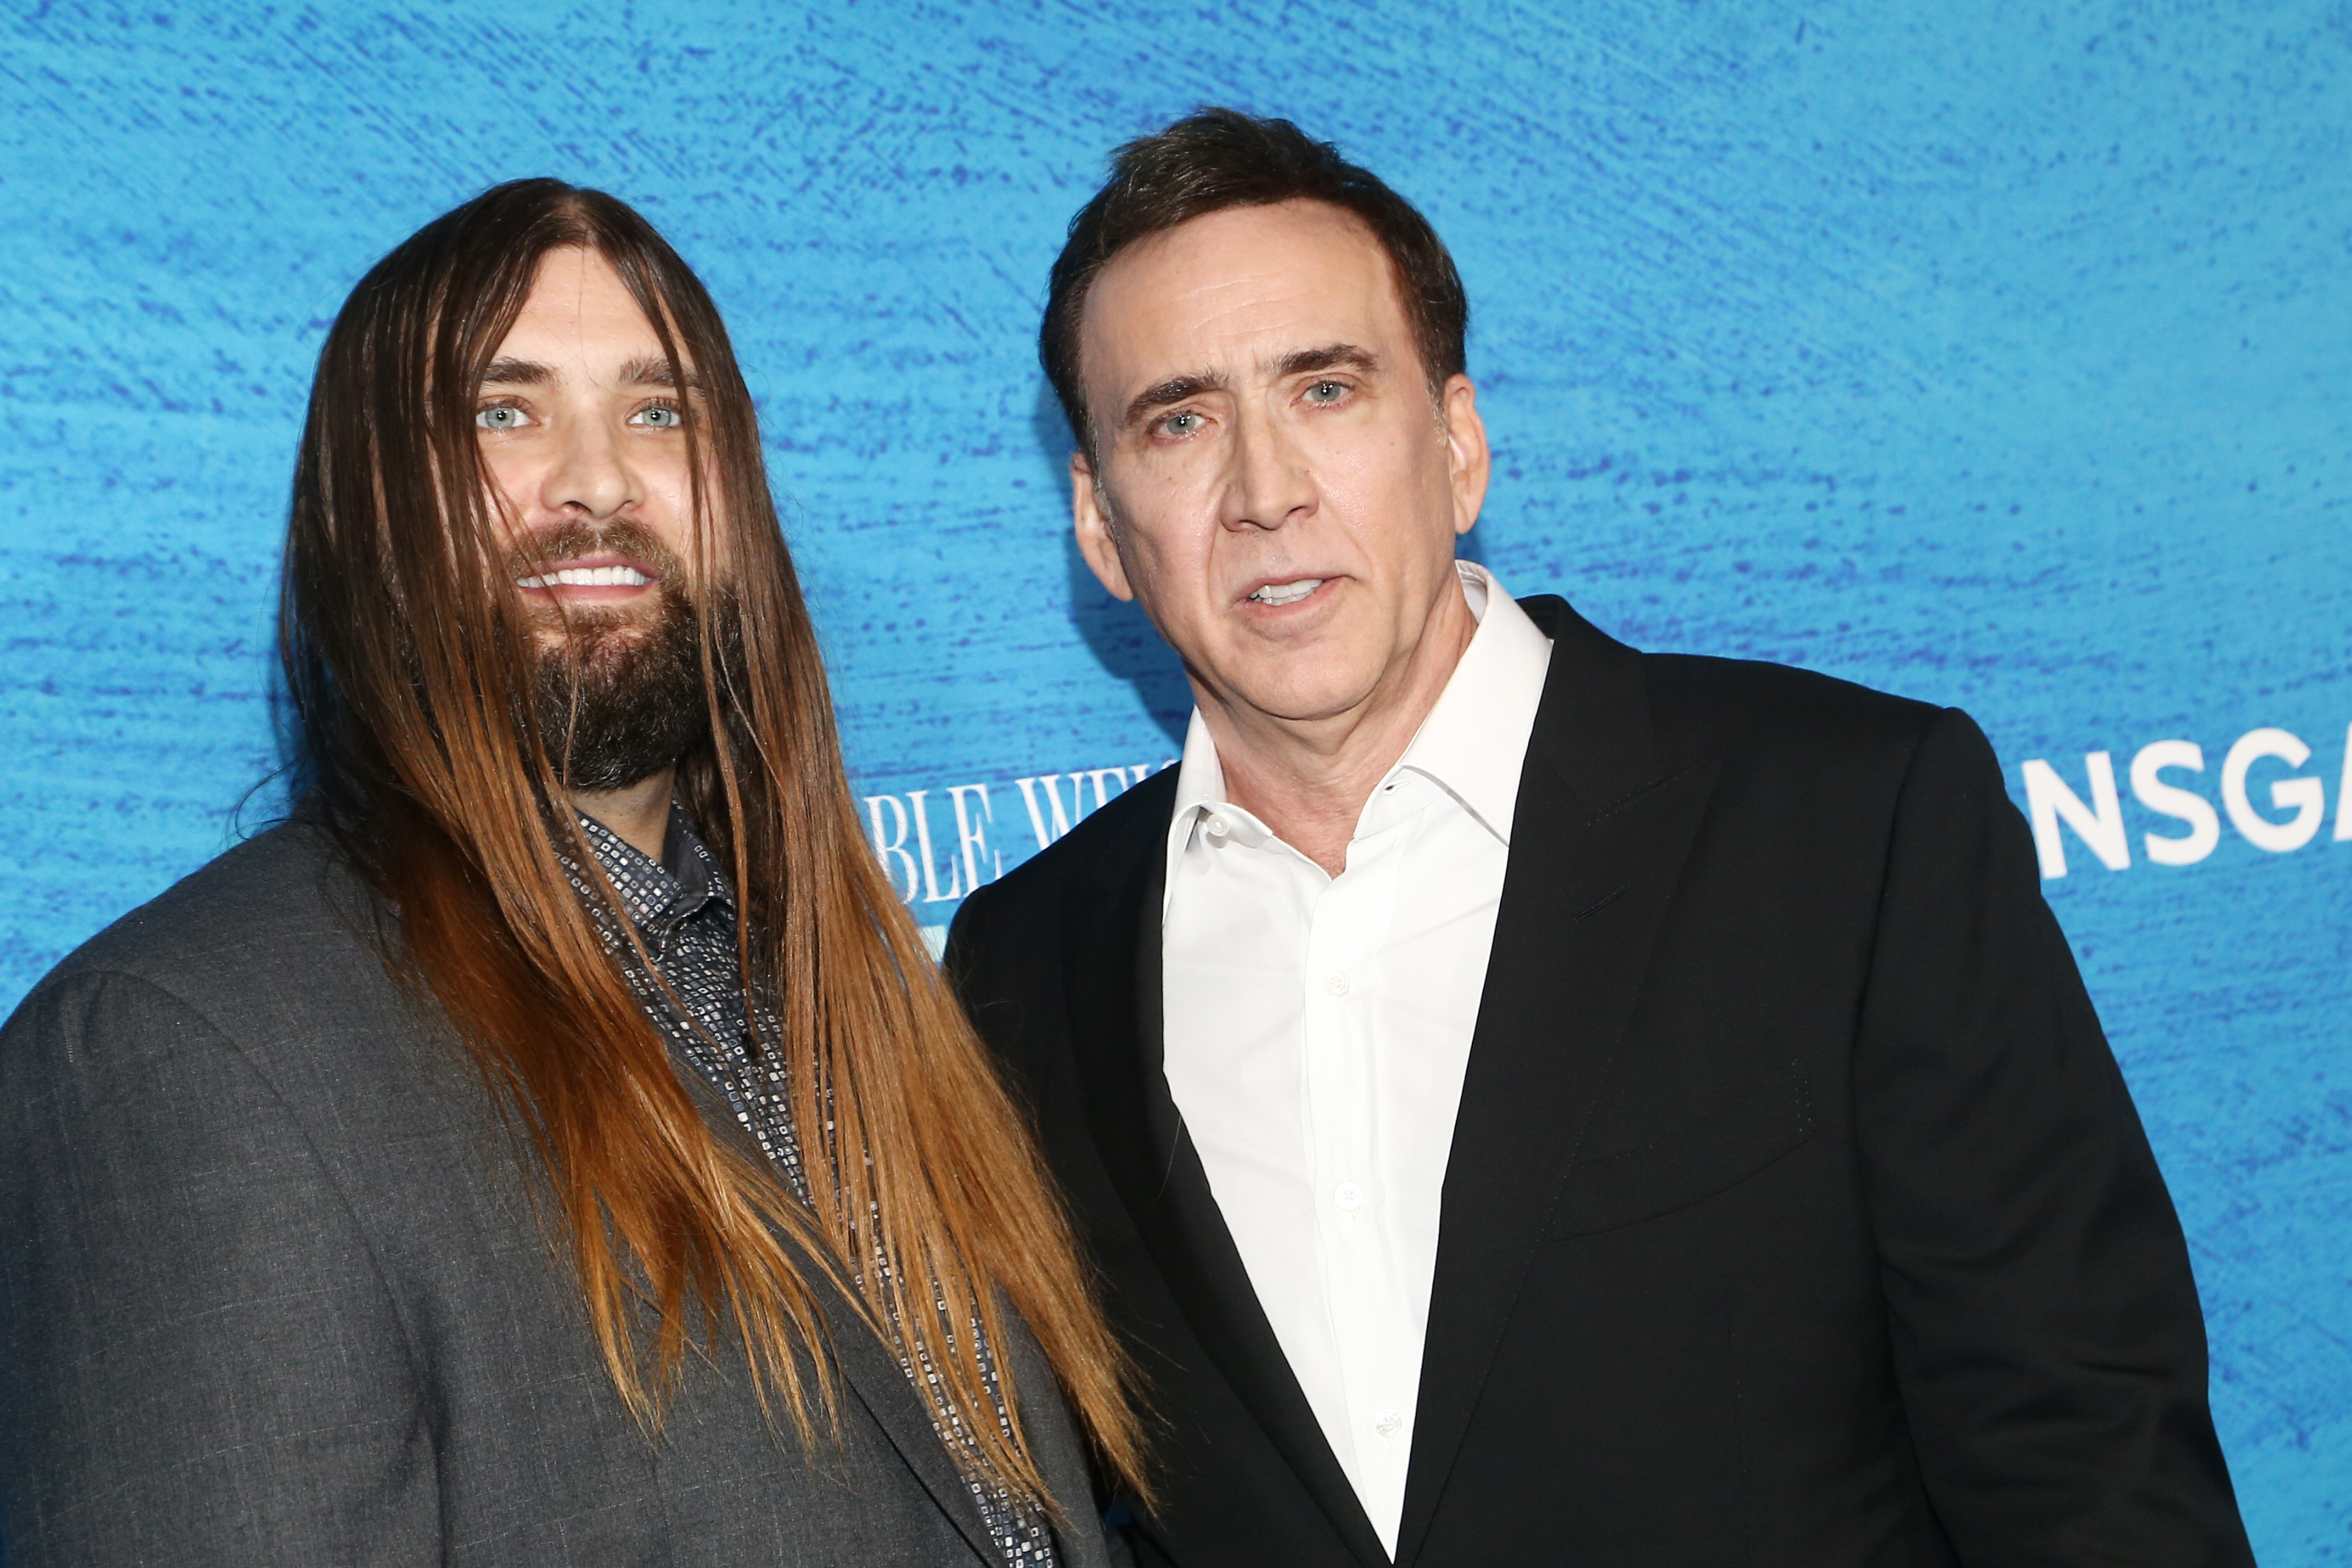 Weston Cage Coppola and Nicolas Cage at the screening of "The Unbearable Weight Of Massive Talent" in Los Angeles in 2022 | Source: Getty Images